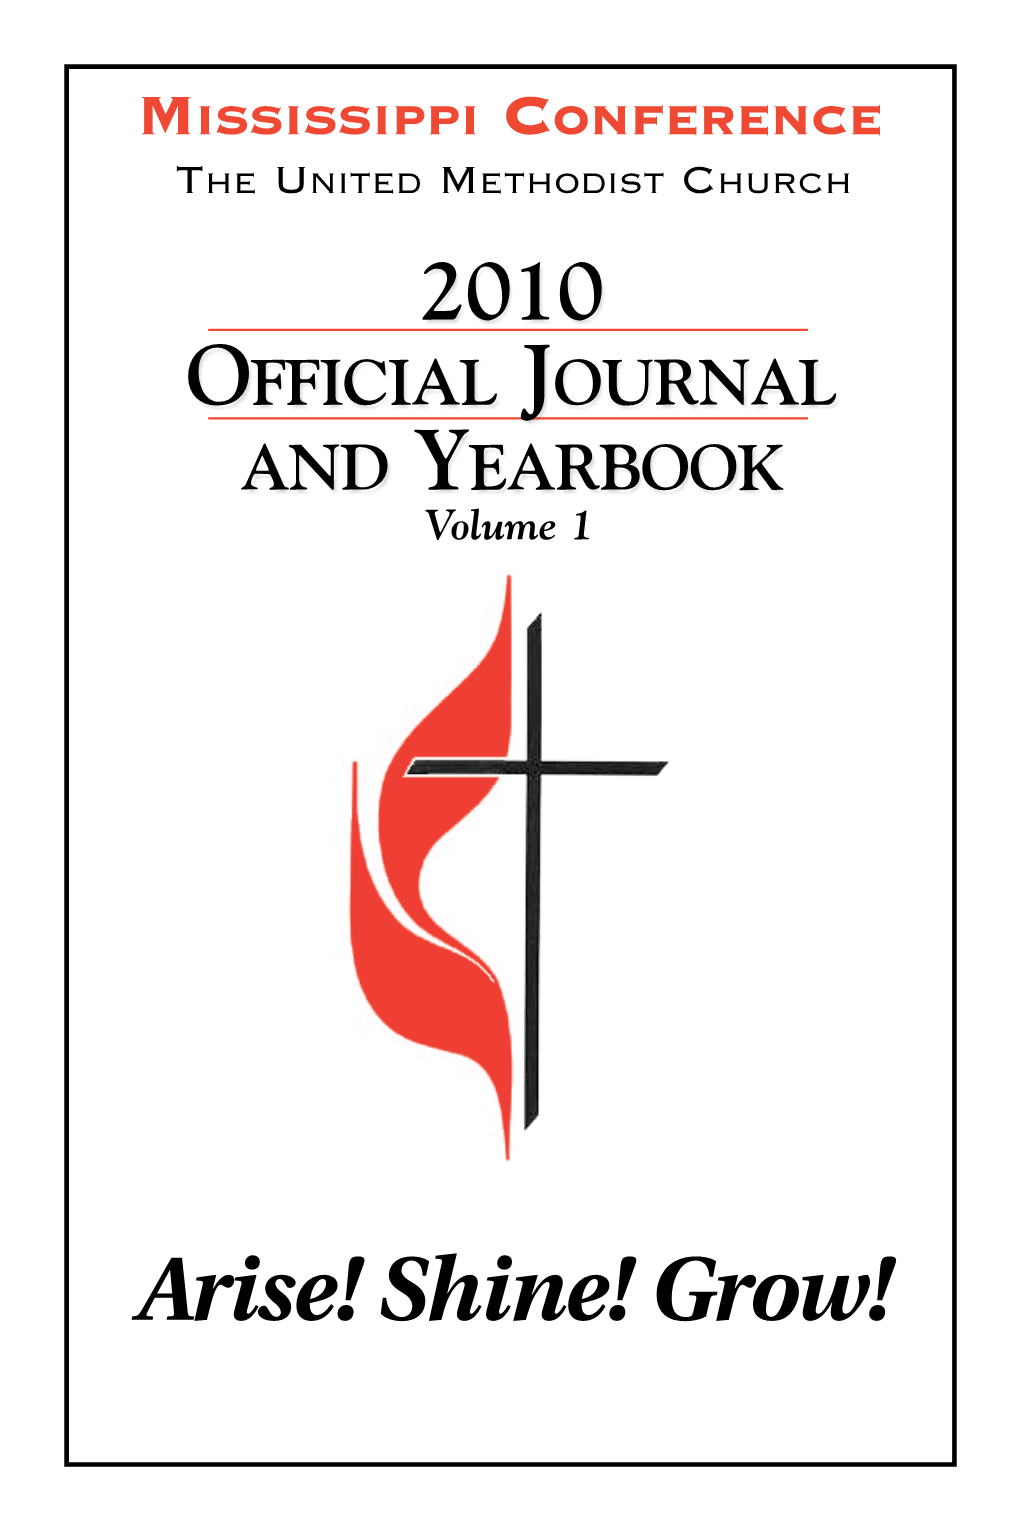 2010 Official Journal and Yearbook Volume 1